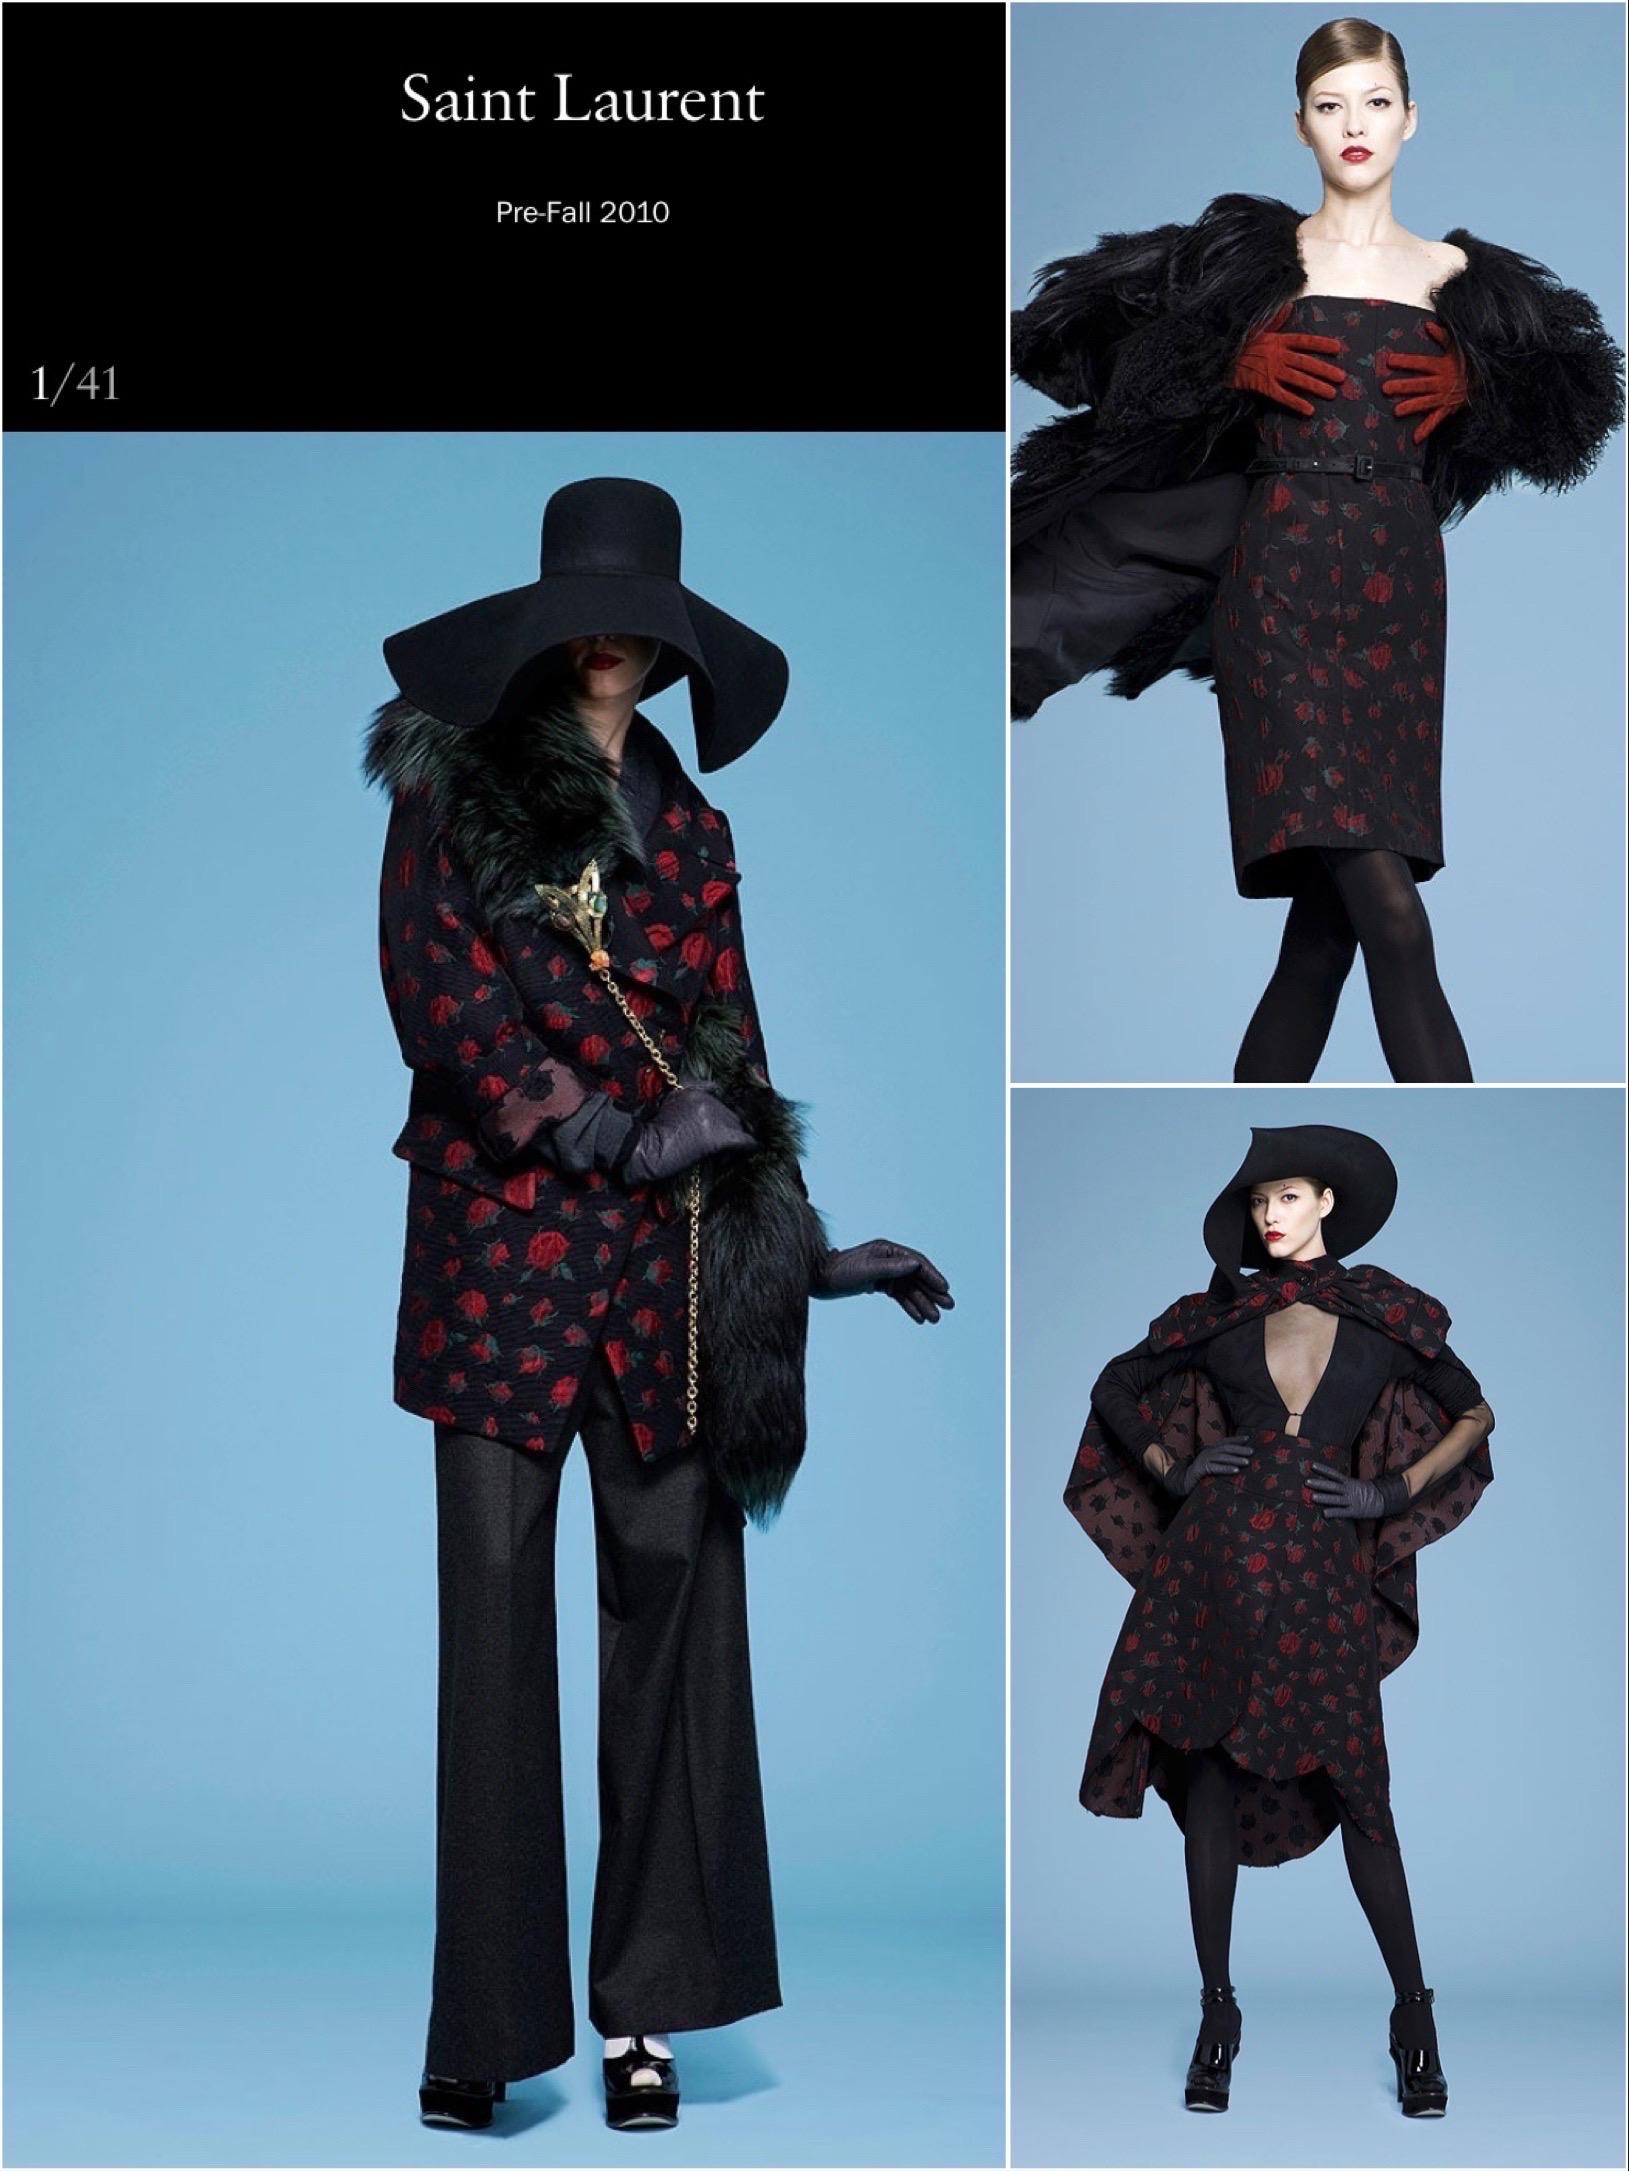 This Saint Laurent by Stefano Pilati floral jacquard coat/blazer opens the Pre-Fall 2010 collection (Look 1).  The garment is fashioned in cotton & silk jacquard 